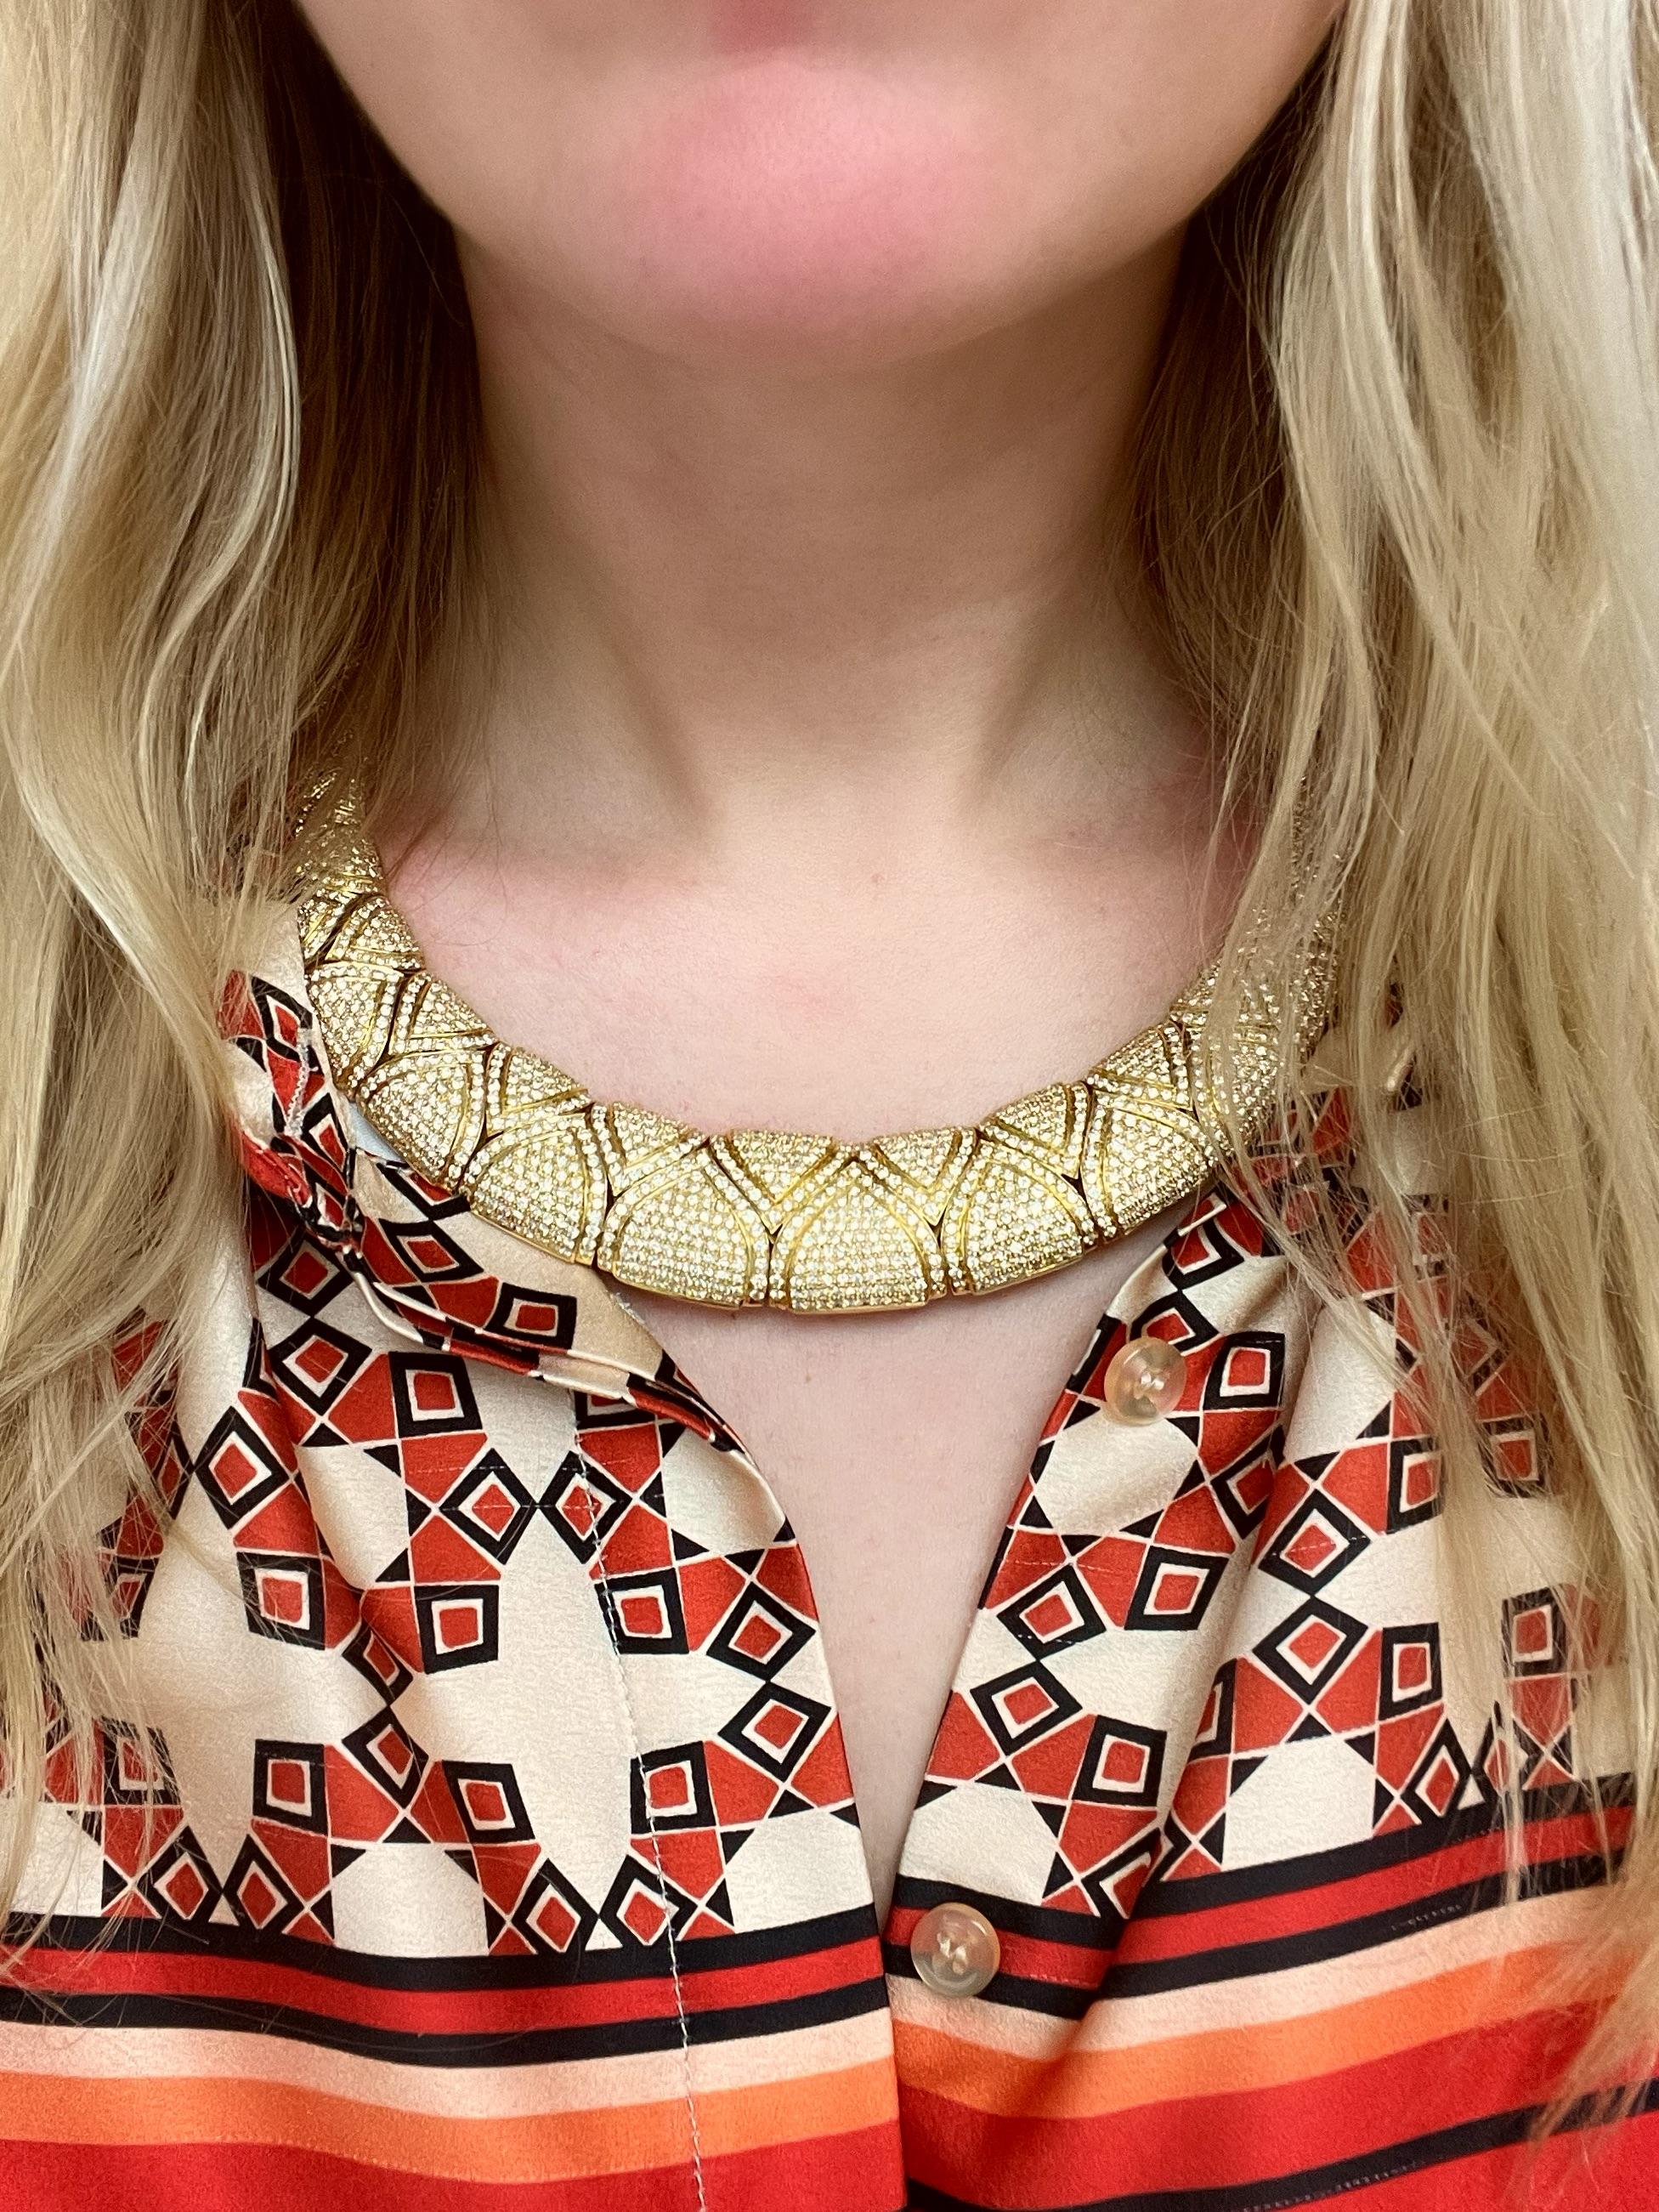 This gorgeous collar necklace encrusted with numerous top quality round brilliant cut diamonds in a geometric design weighing approximately 28.00 carats total. Mounted in 18 karat yellow gold, this necklace is sure to make a statement!

Total